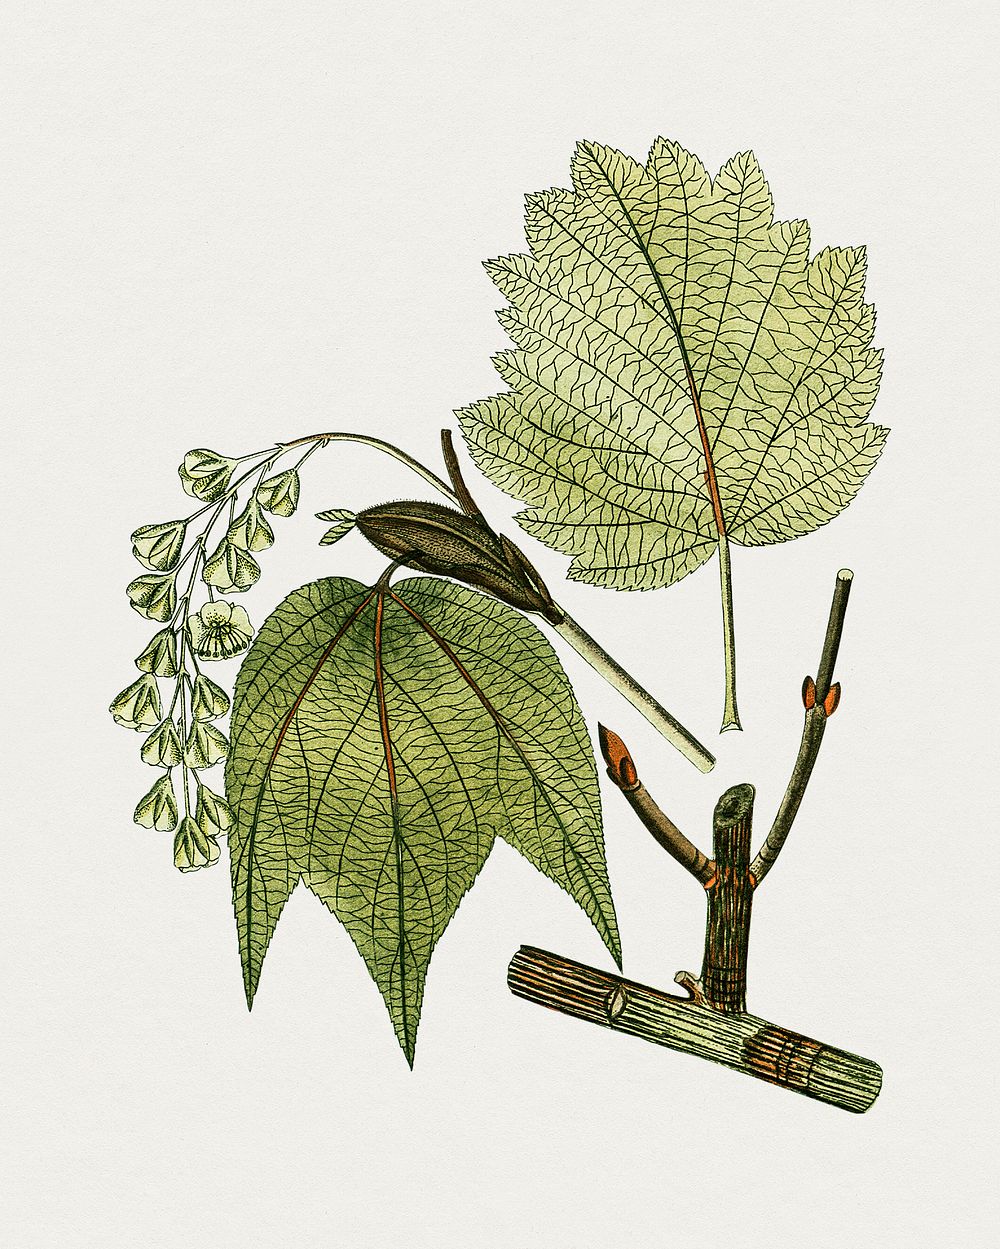 Hand drawn striped maple leaf. Original from Biodiversity Heritage Library. Digitally enhanced by rawpixel.